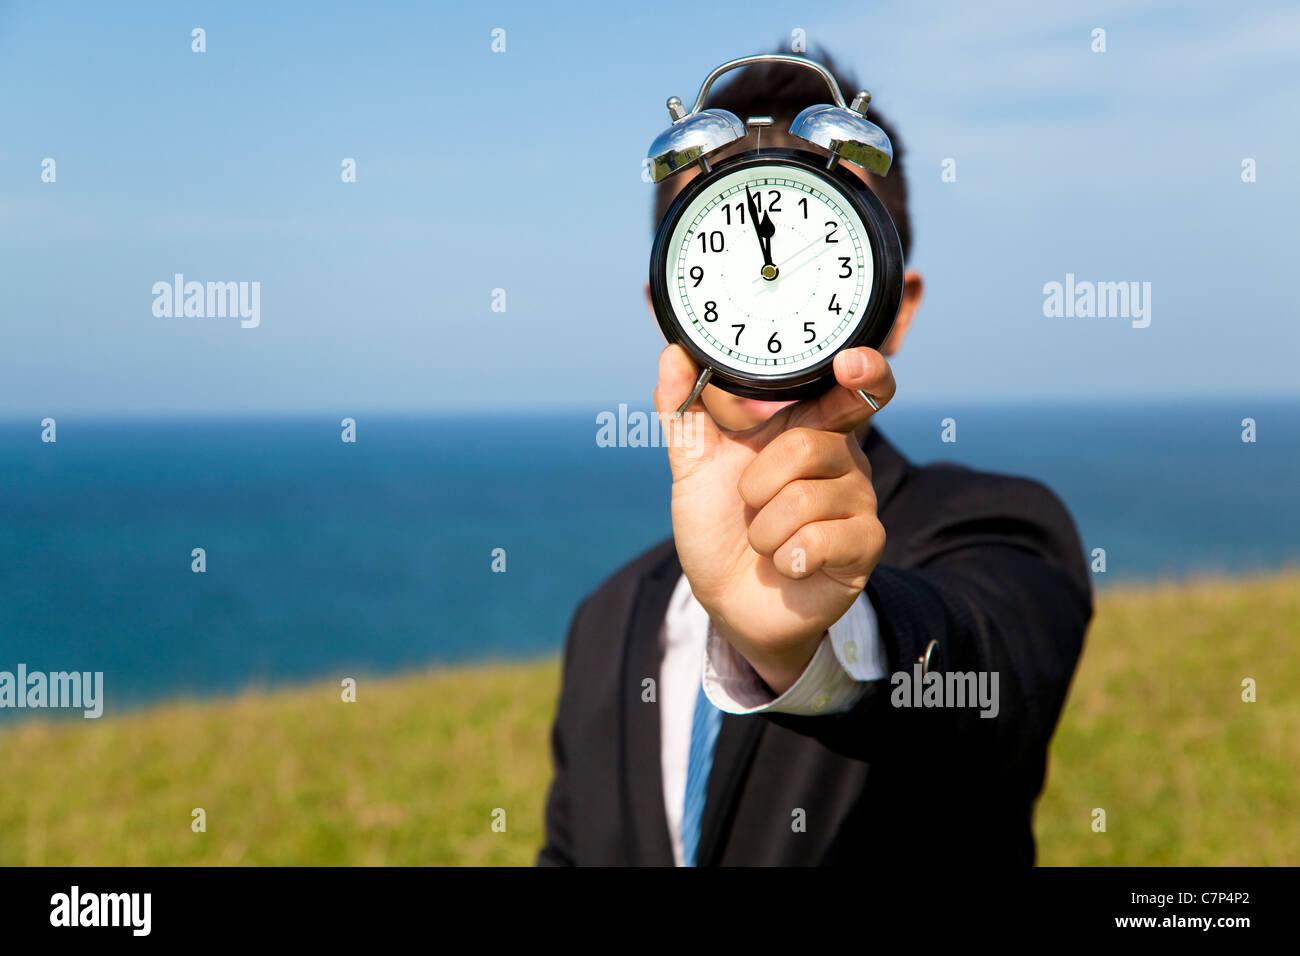 businessman holding clock and standing on the field Stock Photo